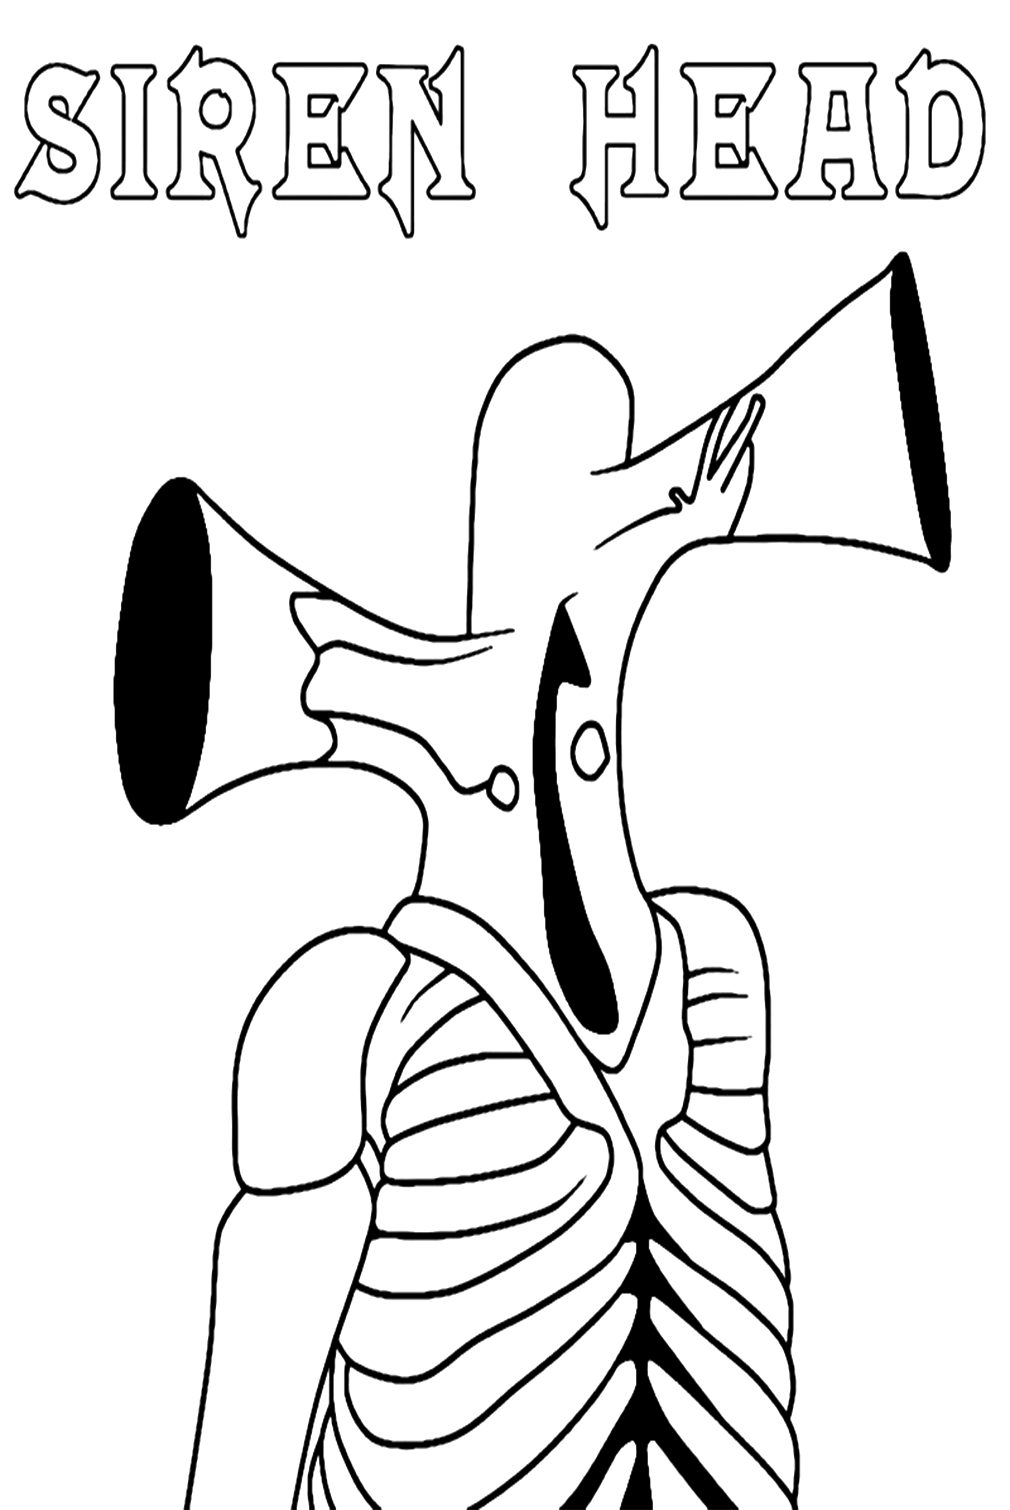 Siren Head Image Coloring Pages